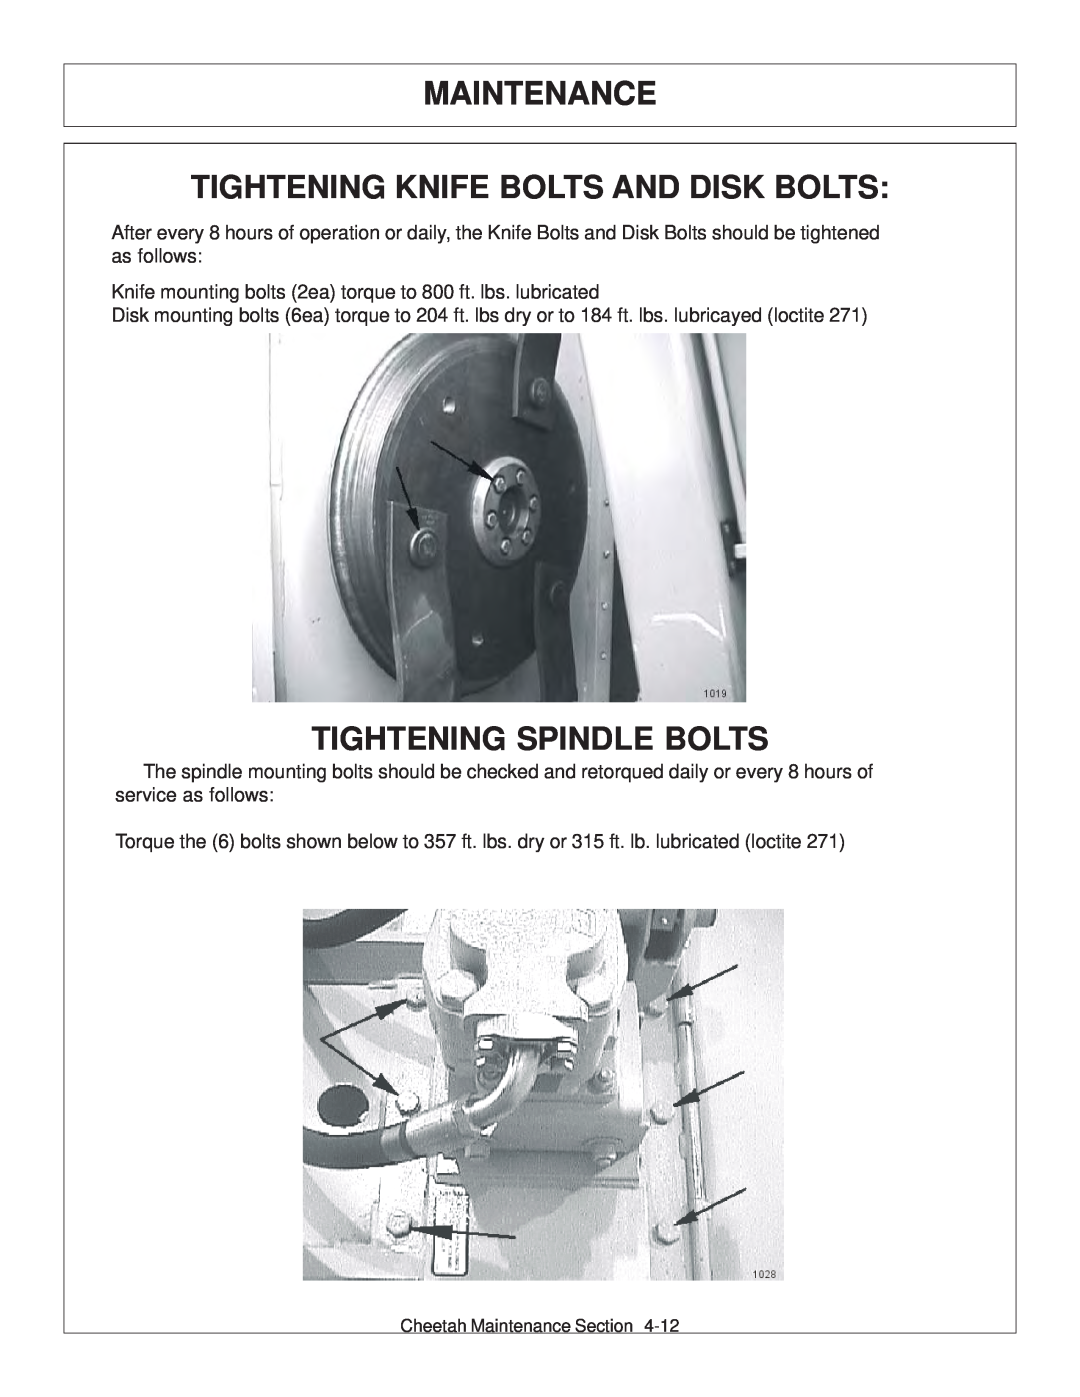 Tiger Products Co., Ltd JD 5101E, JD 5083E Maintenance Tightening Knife Bolts And Disk Bolts, Tightening Spindle Bolts 